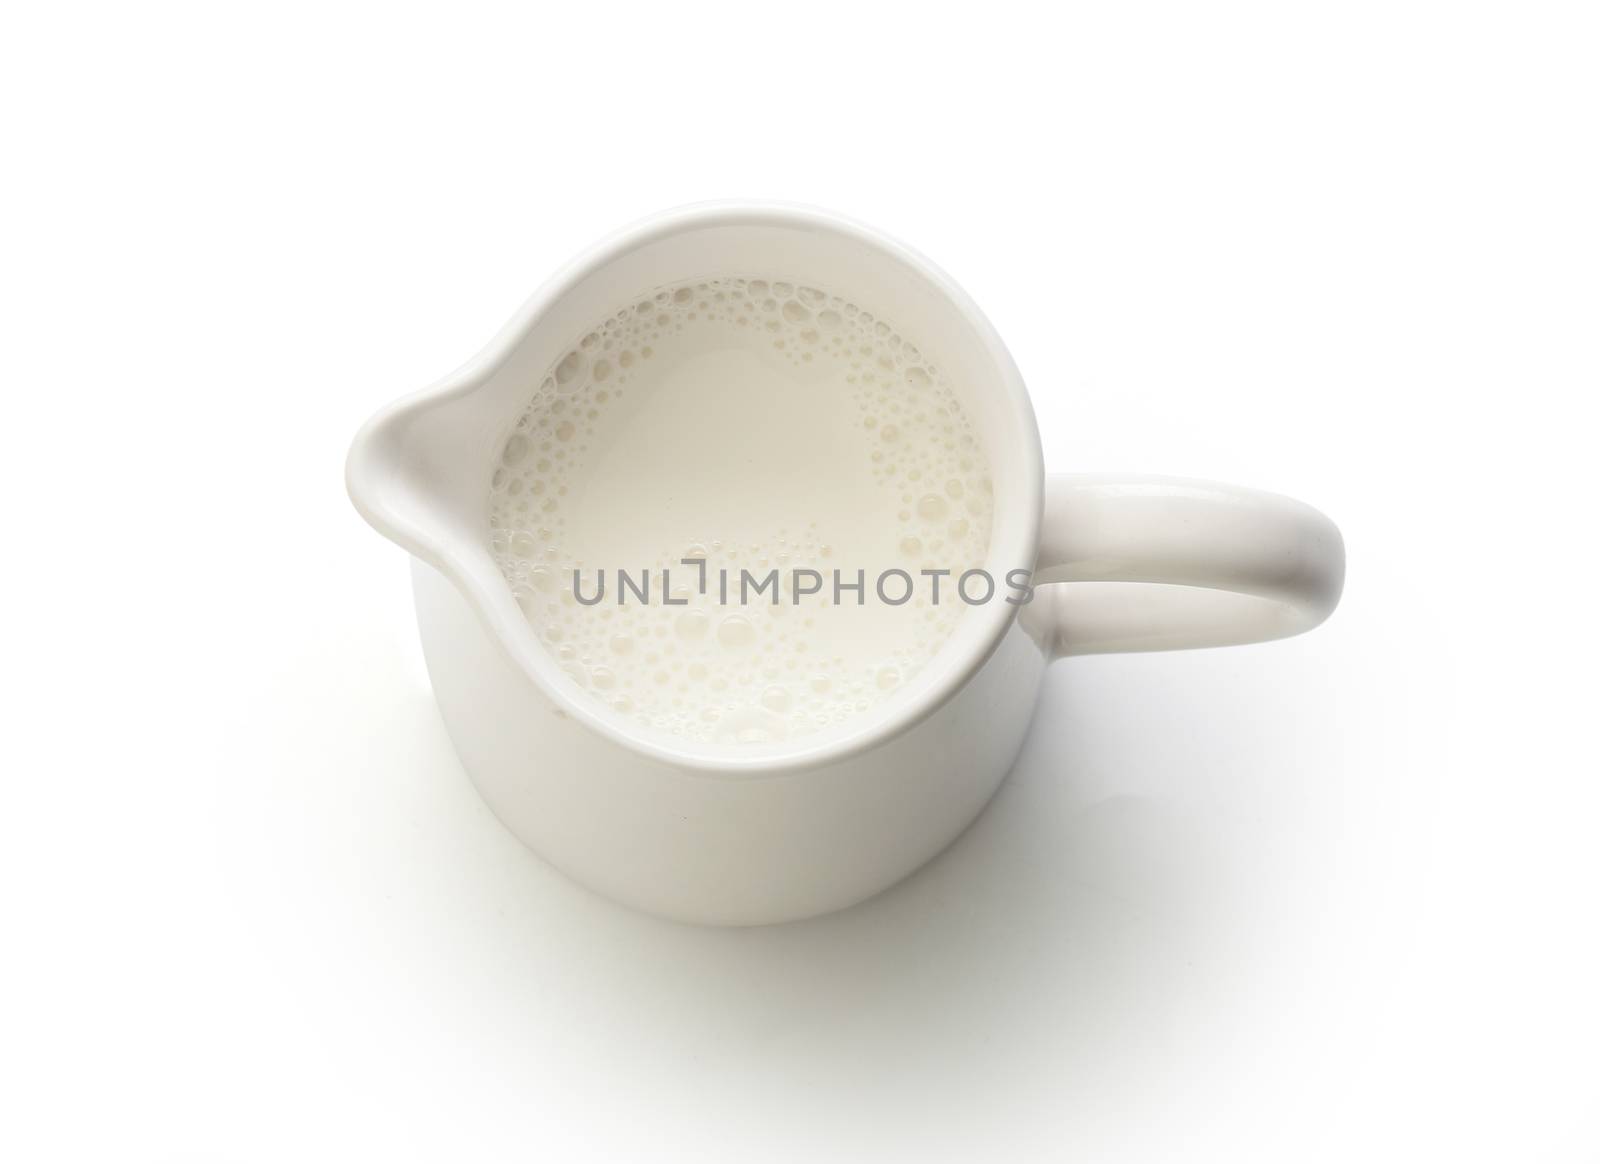 Top view of milk jug with milk on the white